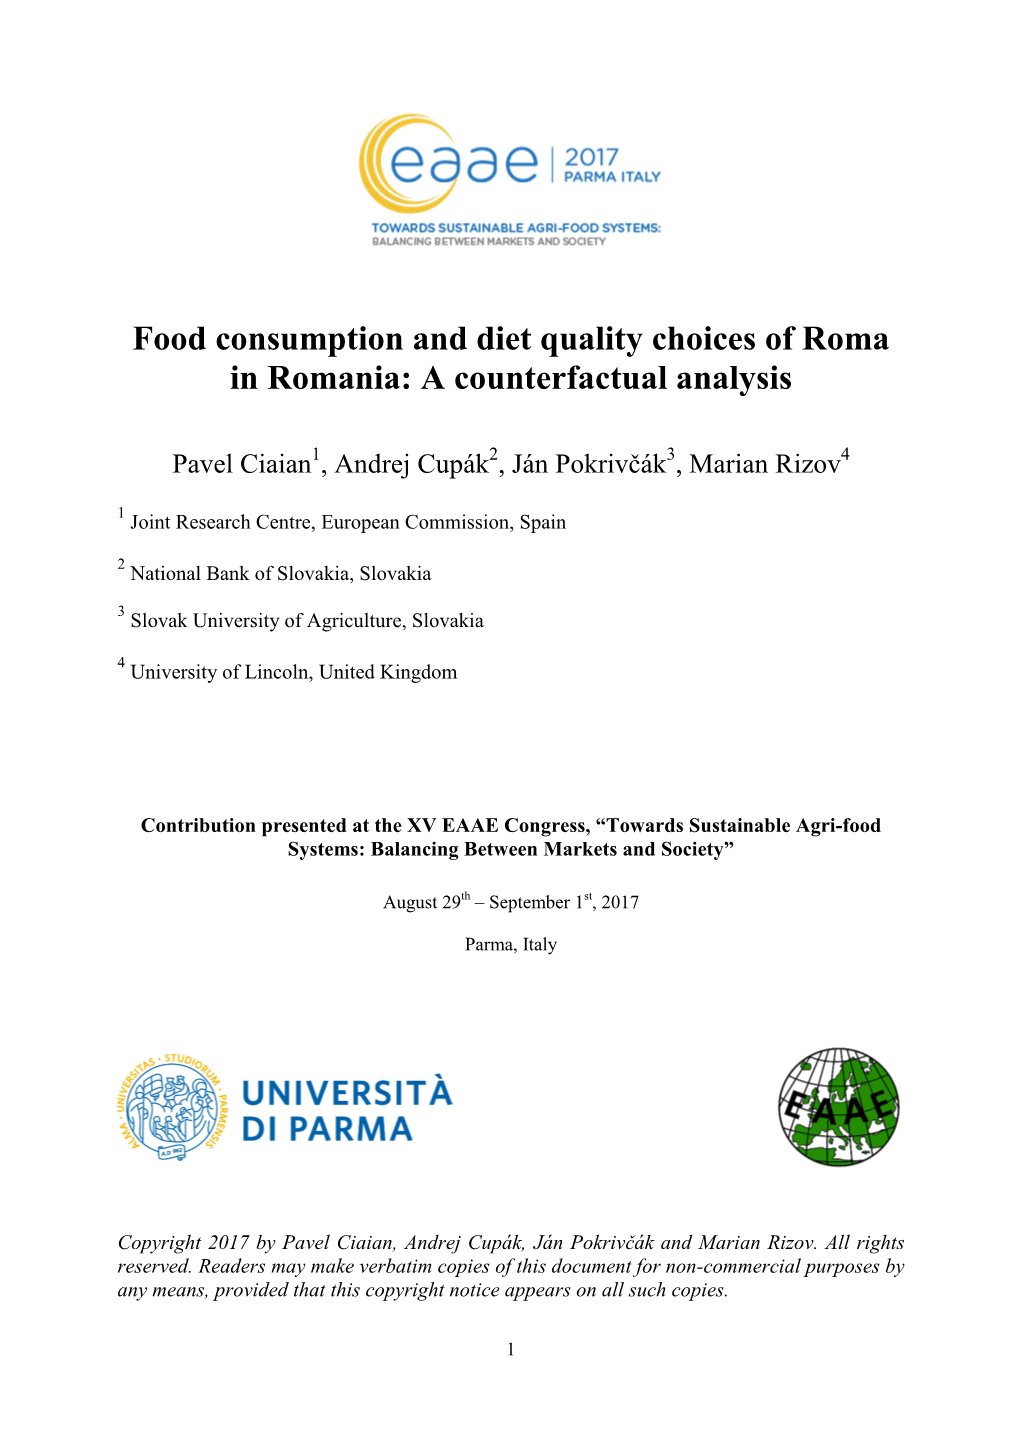 Food Consumption and Diet Quality Choices of Roma in Romania: a Counterfactual Analysis